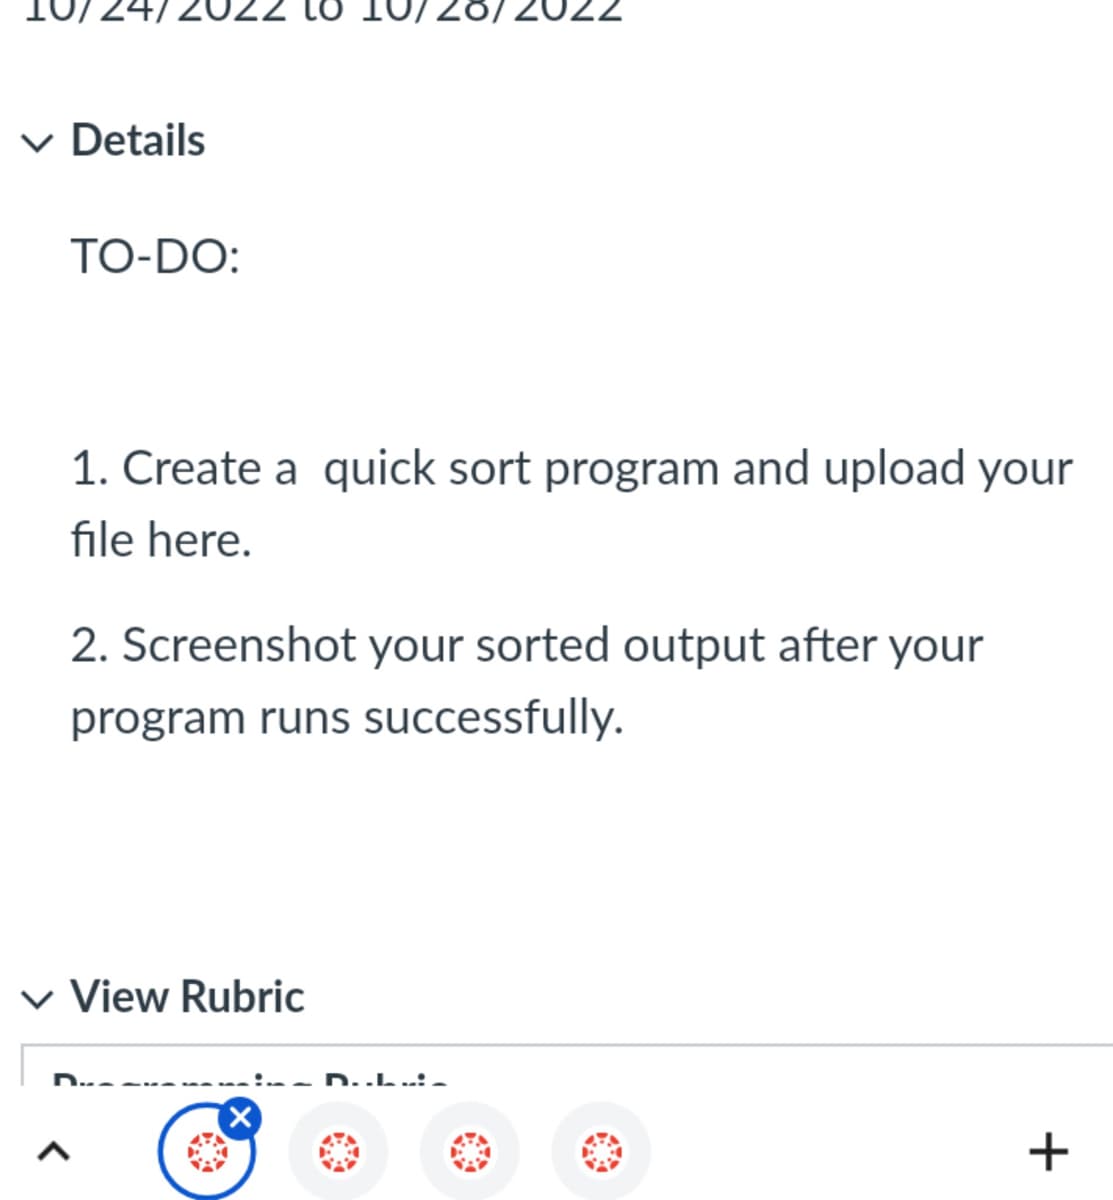 ✓ Details
TO-DO:
1. Create a quick sort program and upload your
file here.
2. Screenshot your sorted output after your
program runs successfully.
✓ View Rubric
X
D..L..:-
00
+